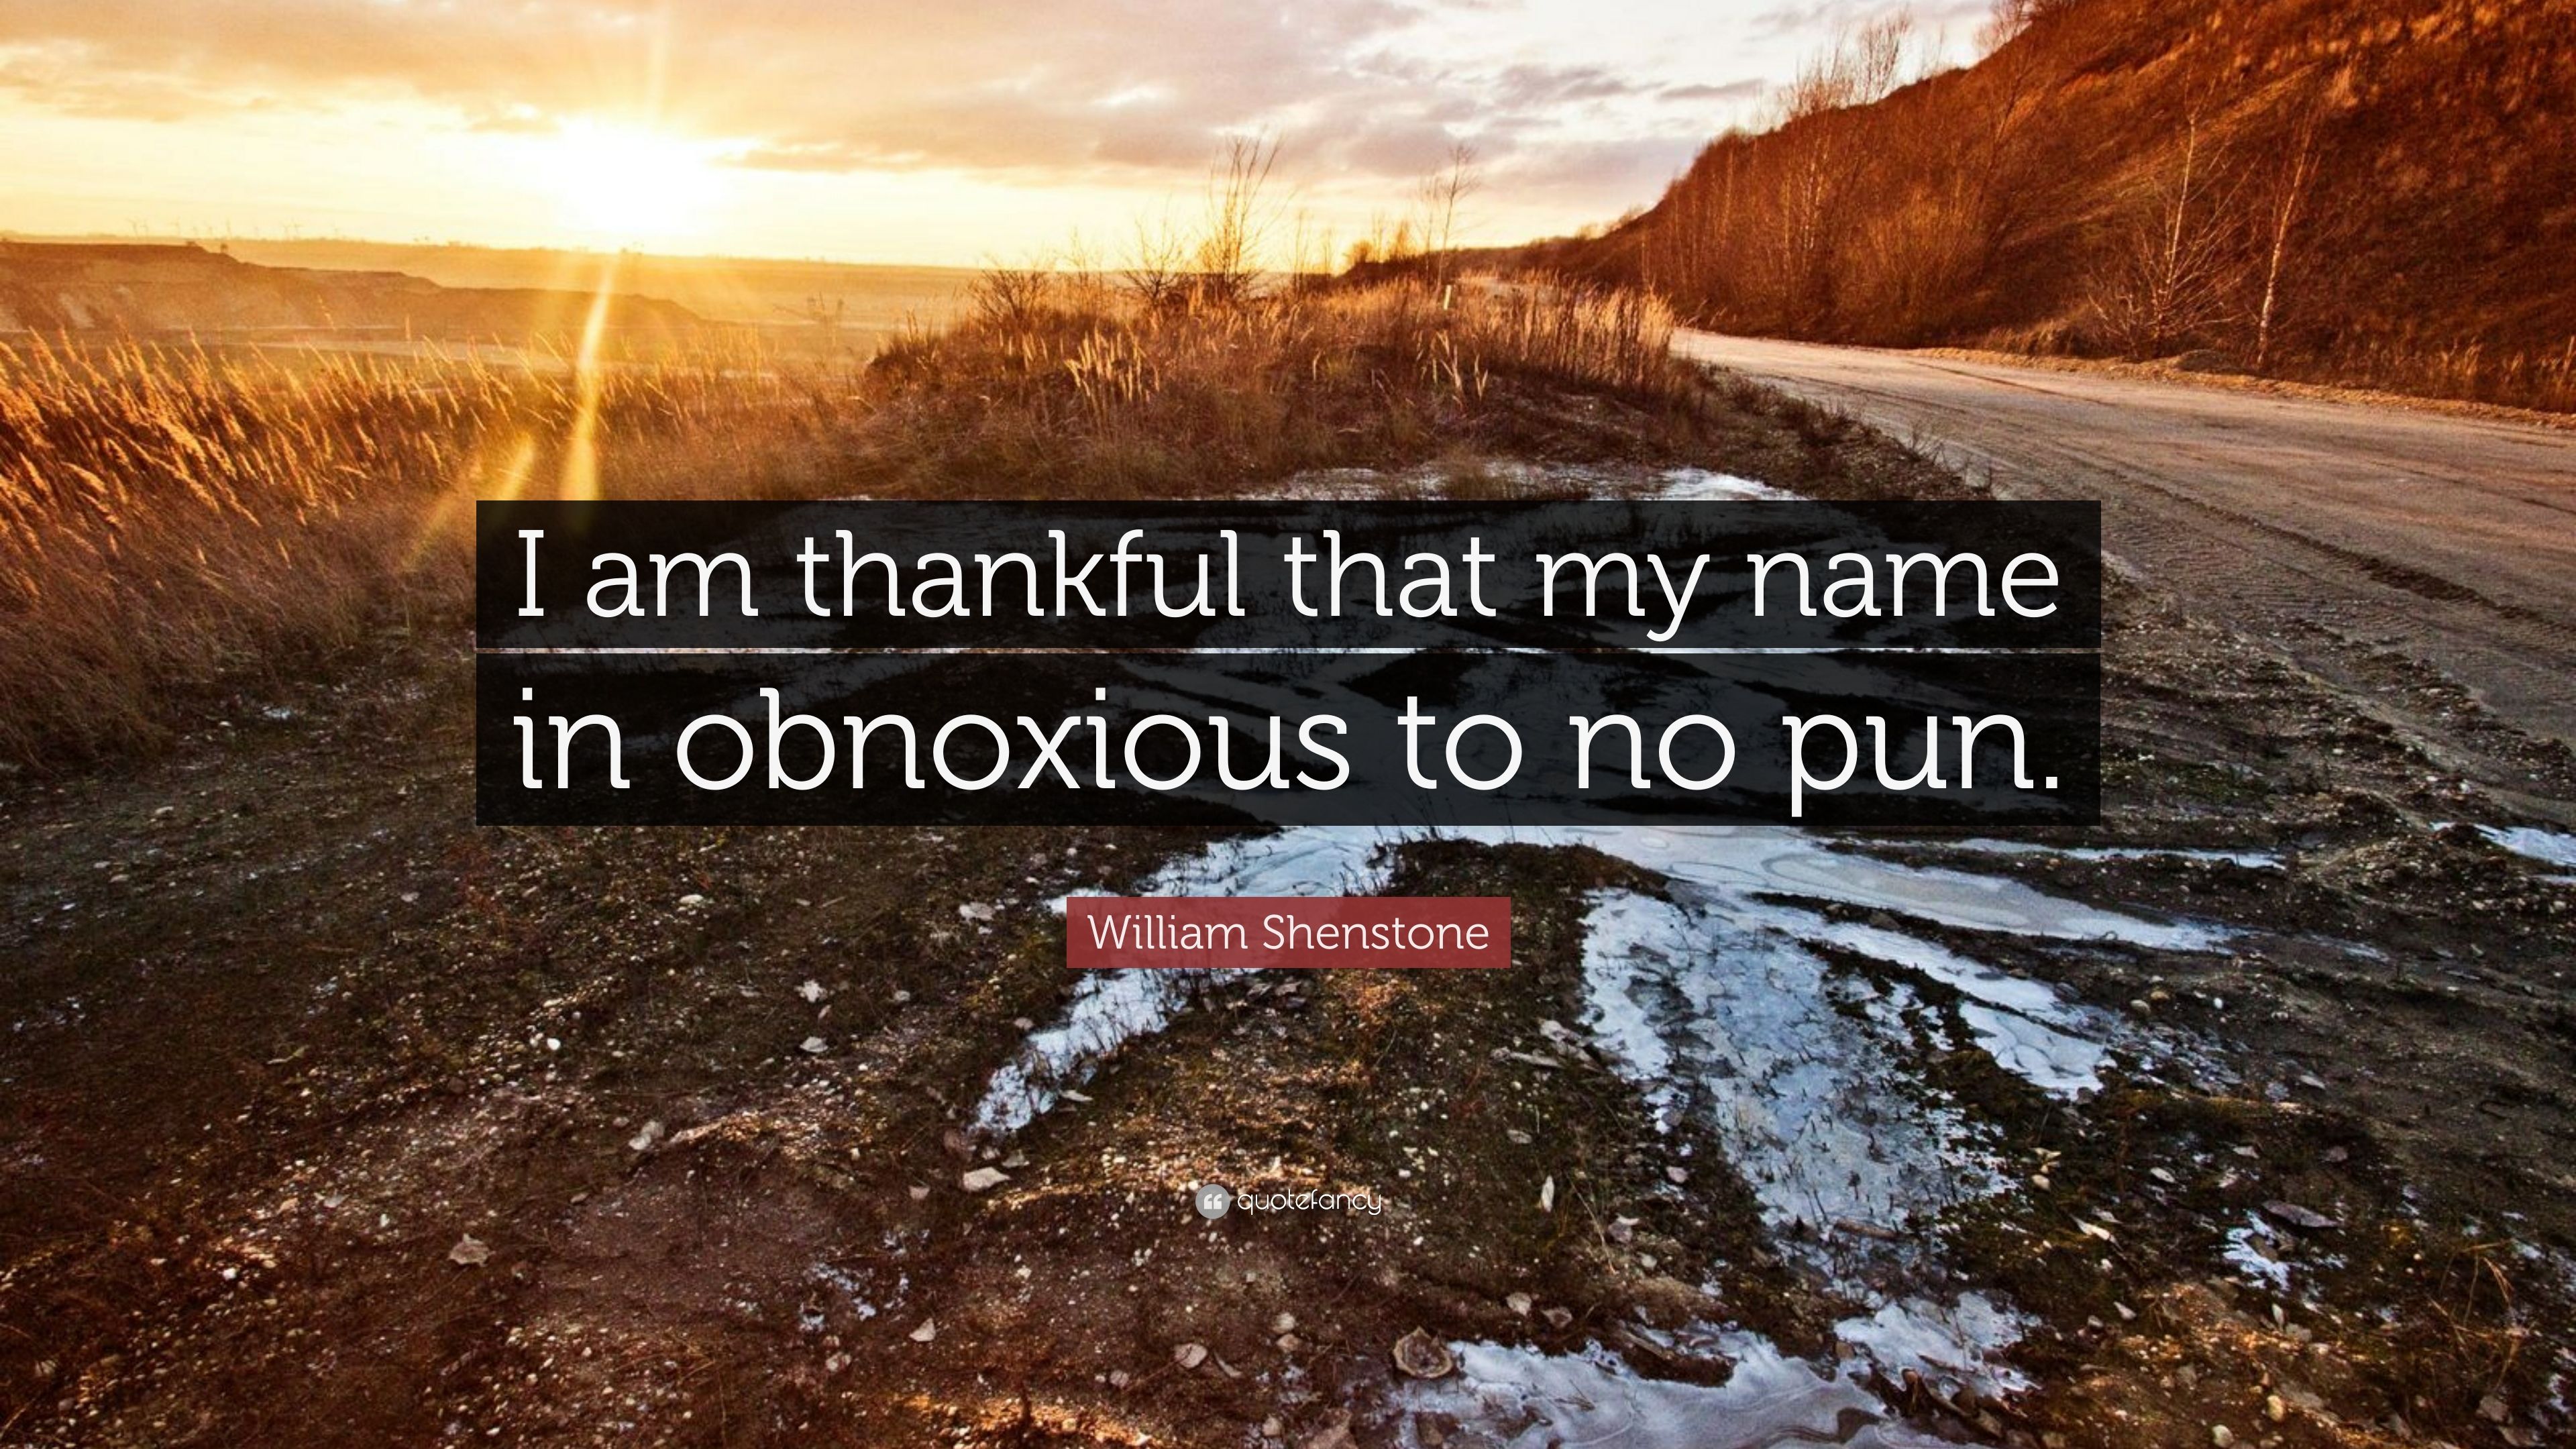 William Shenstone Quote: “I am thankful that my name in obnoxious